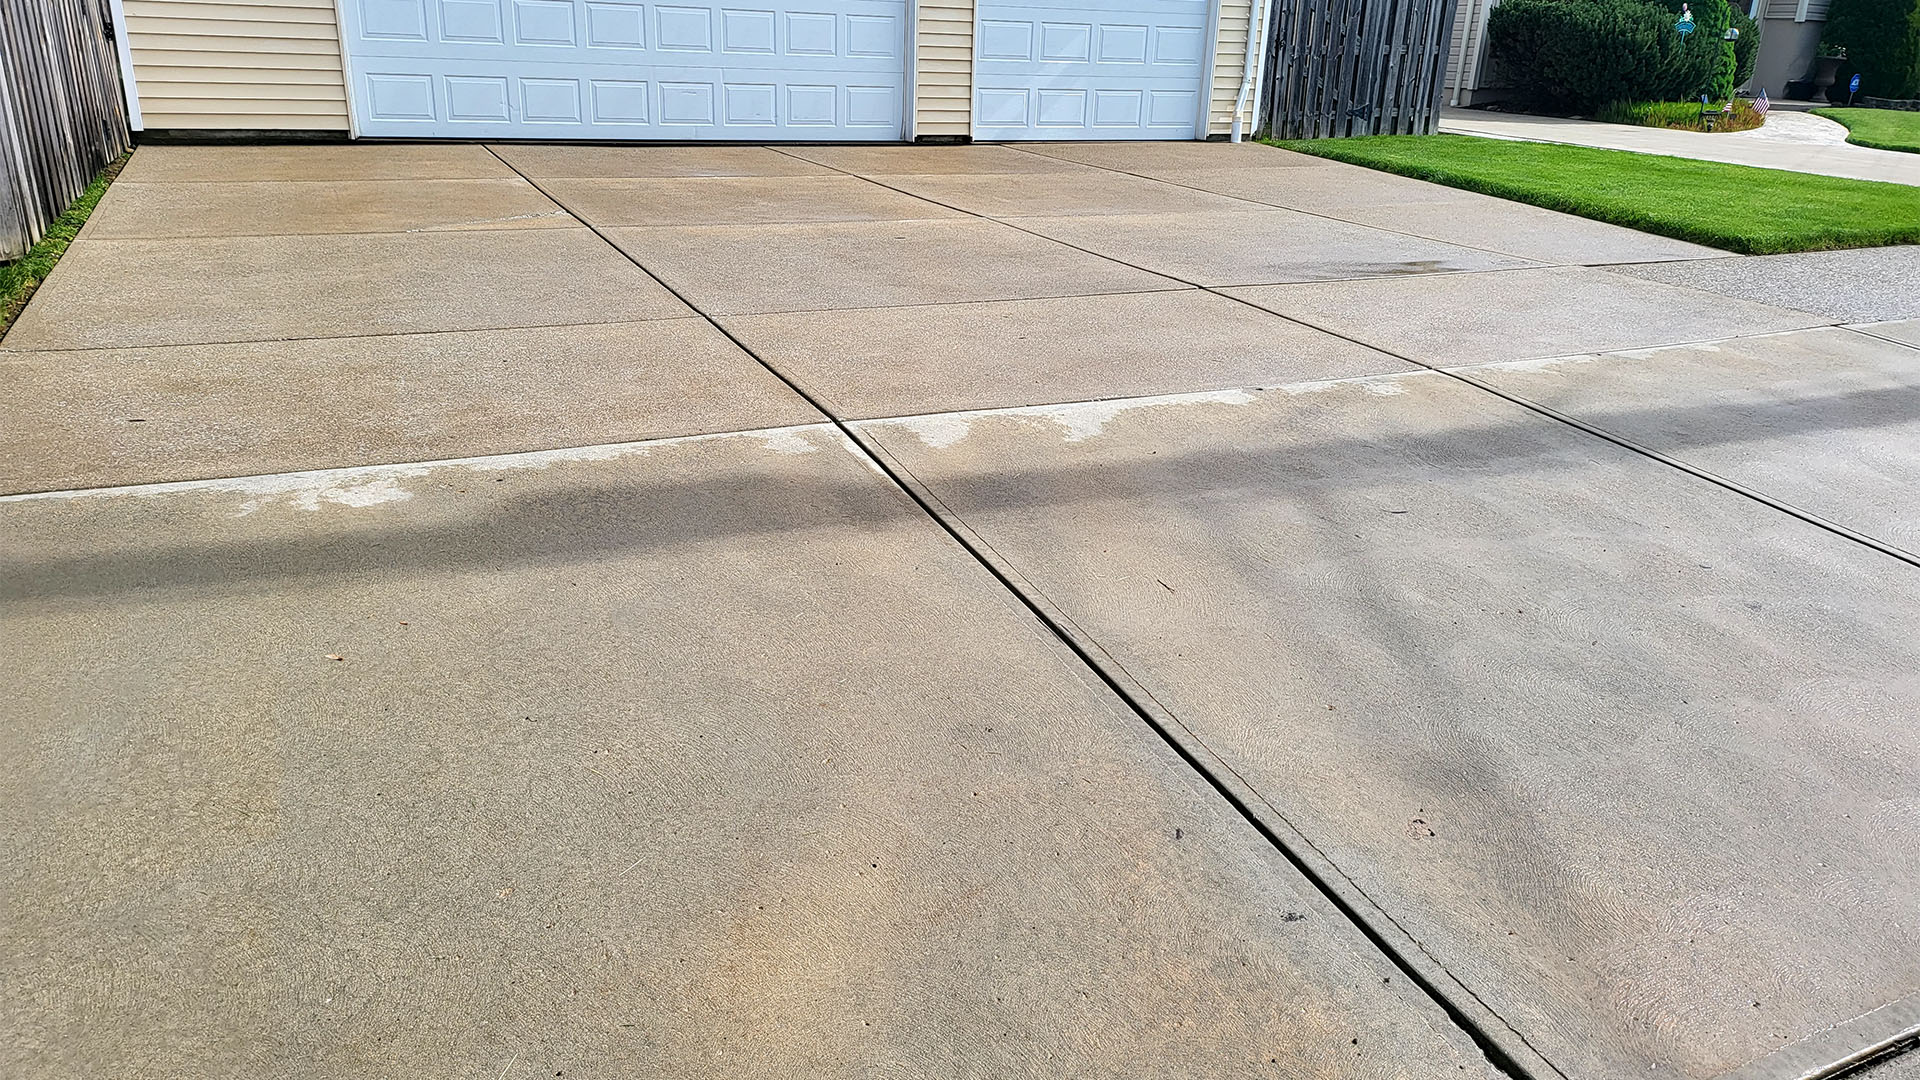 affordable apartment pressure washing,apartment pressure washing,affordable pressure washing